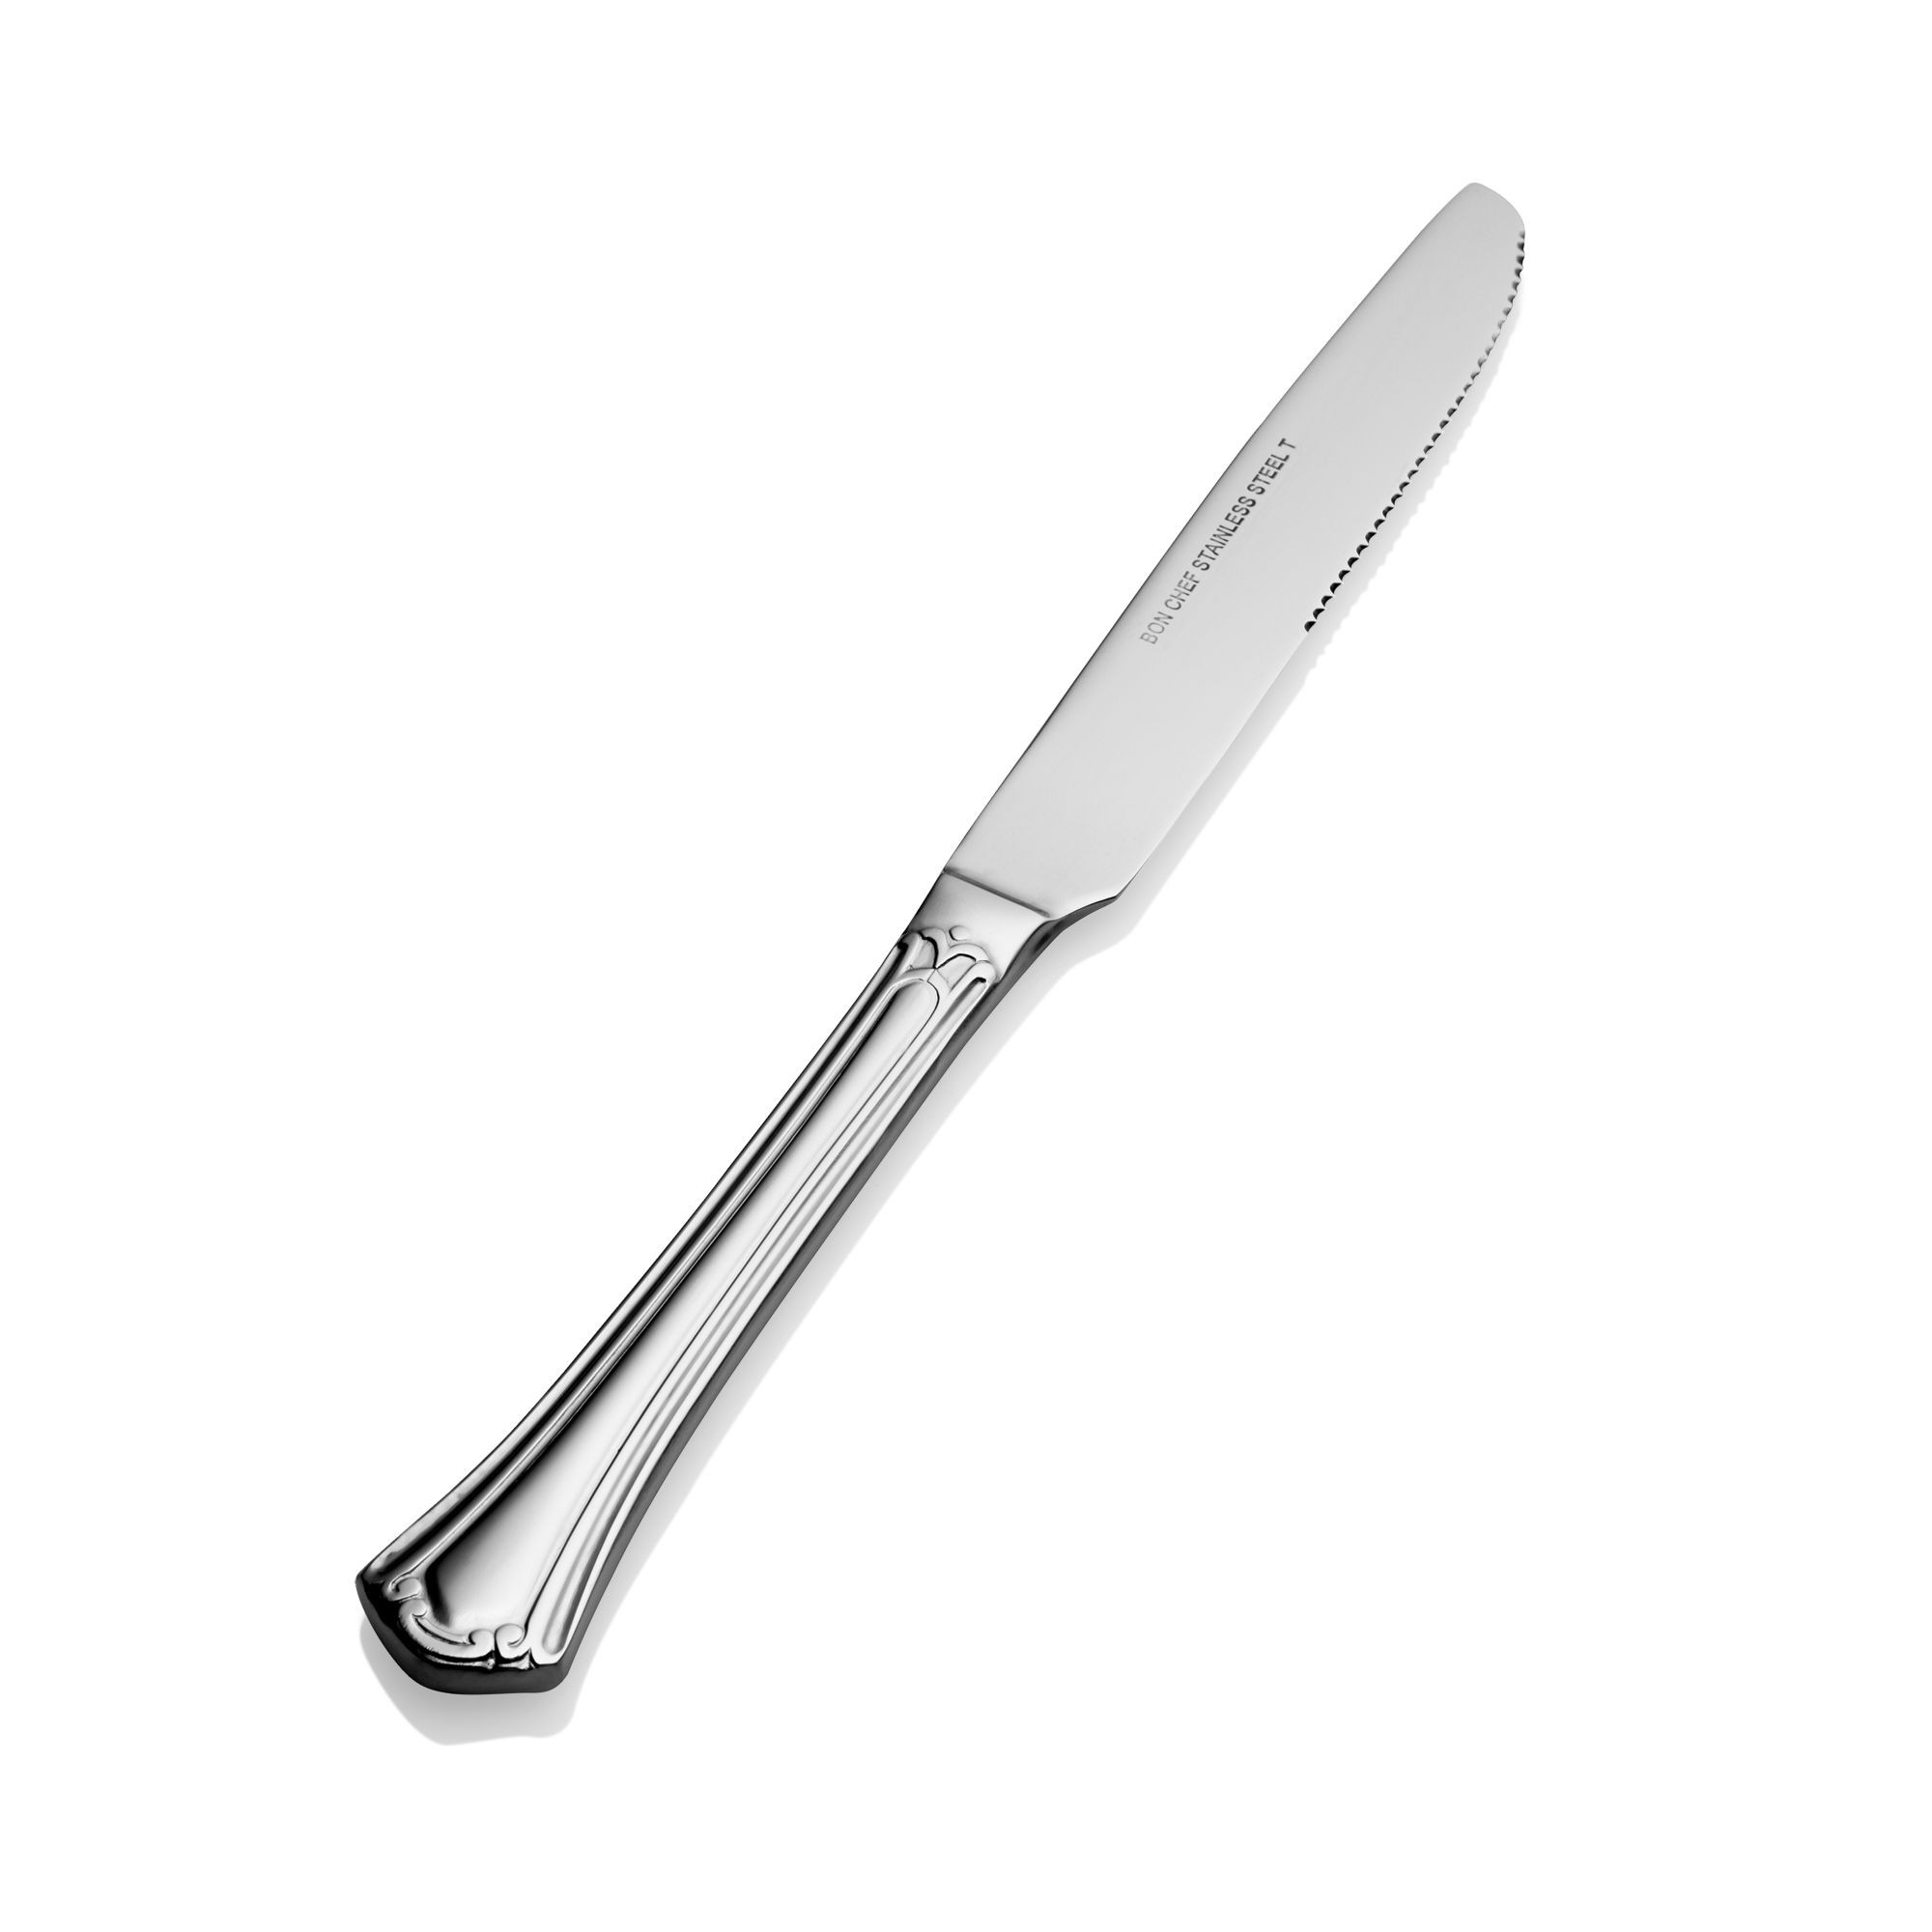 Bon Chef S2112 Breeze 18/8 Stainless Steel European Solid Handle Dinner Knife